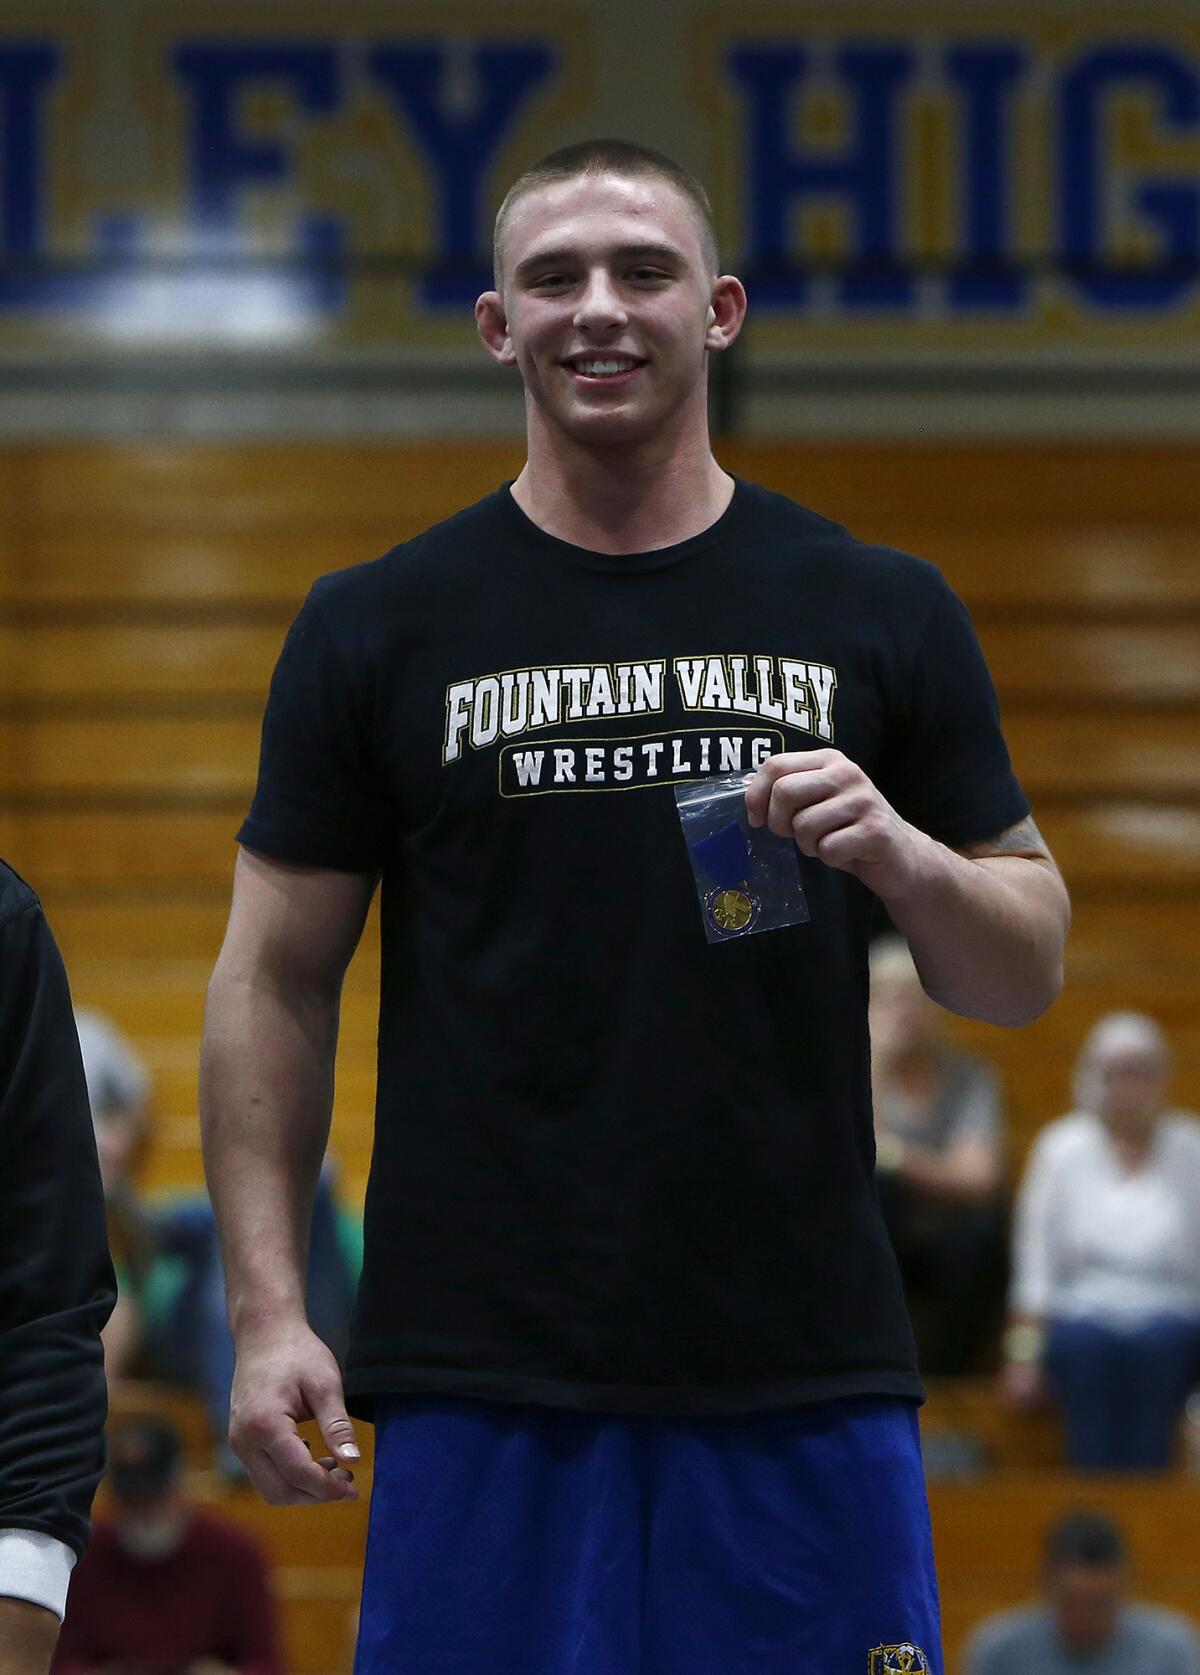 Fountain Valley's TJ McDonnell holds his first-place medal as he stands on the podium among the 182-pound finalists.